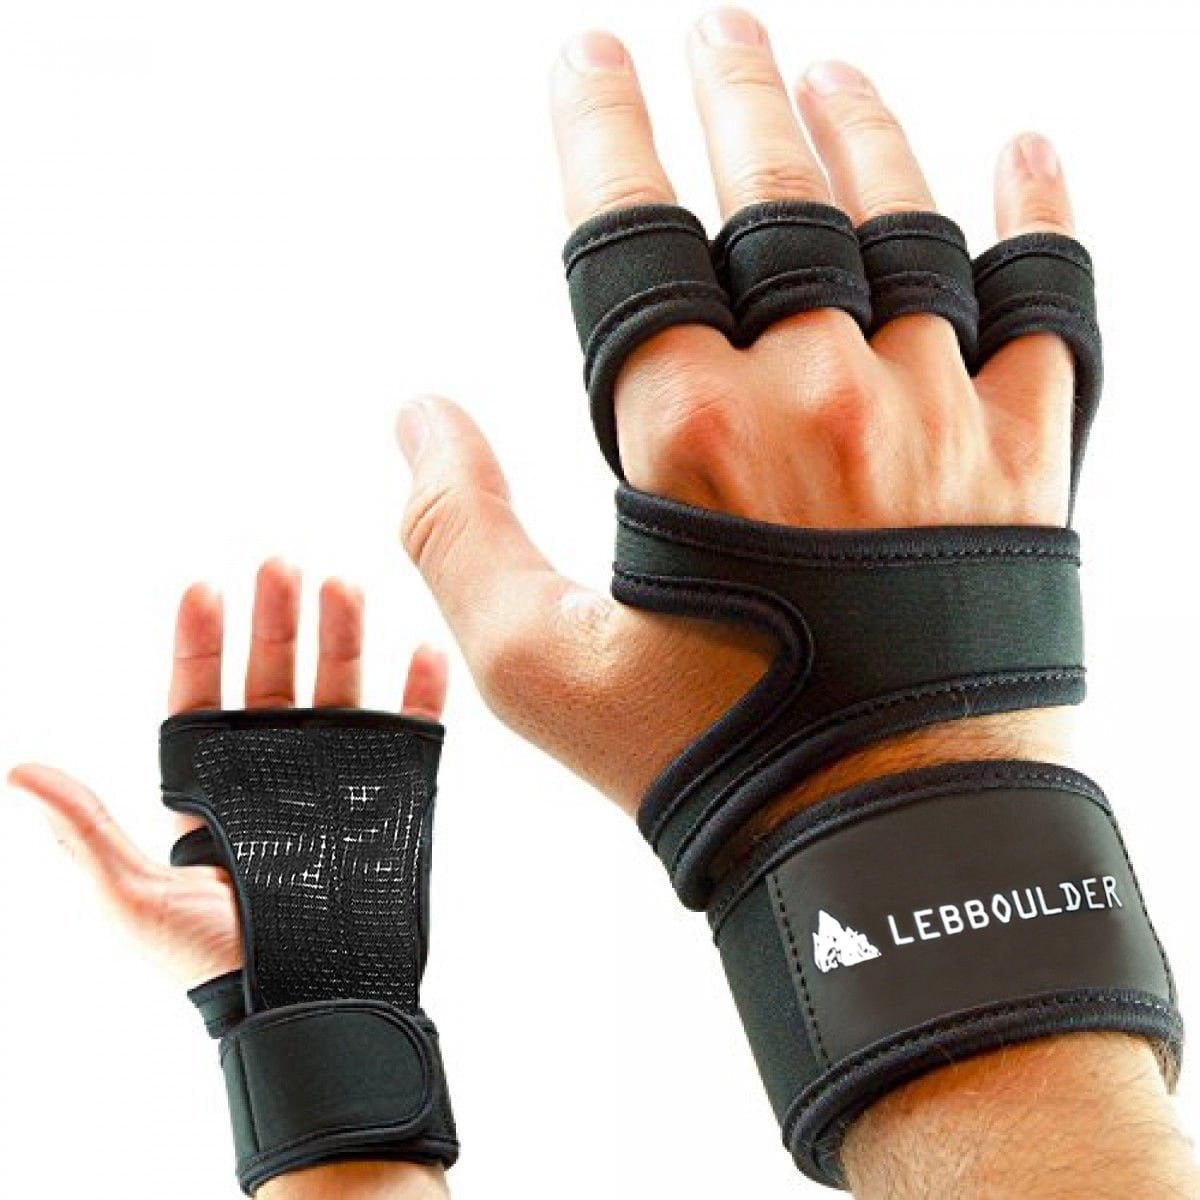 WEIGHT LIFTING LEATHER GLOVES GYM FITNESS CROSSFIT TRAINING BODYBUILDING WORKOUT 